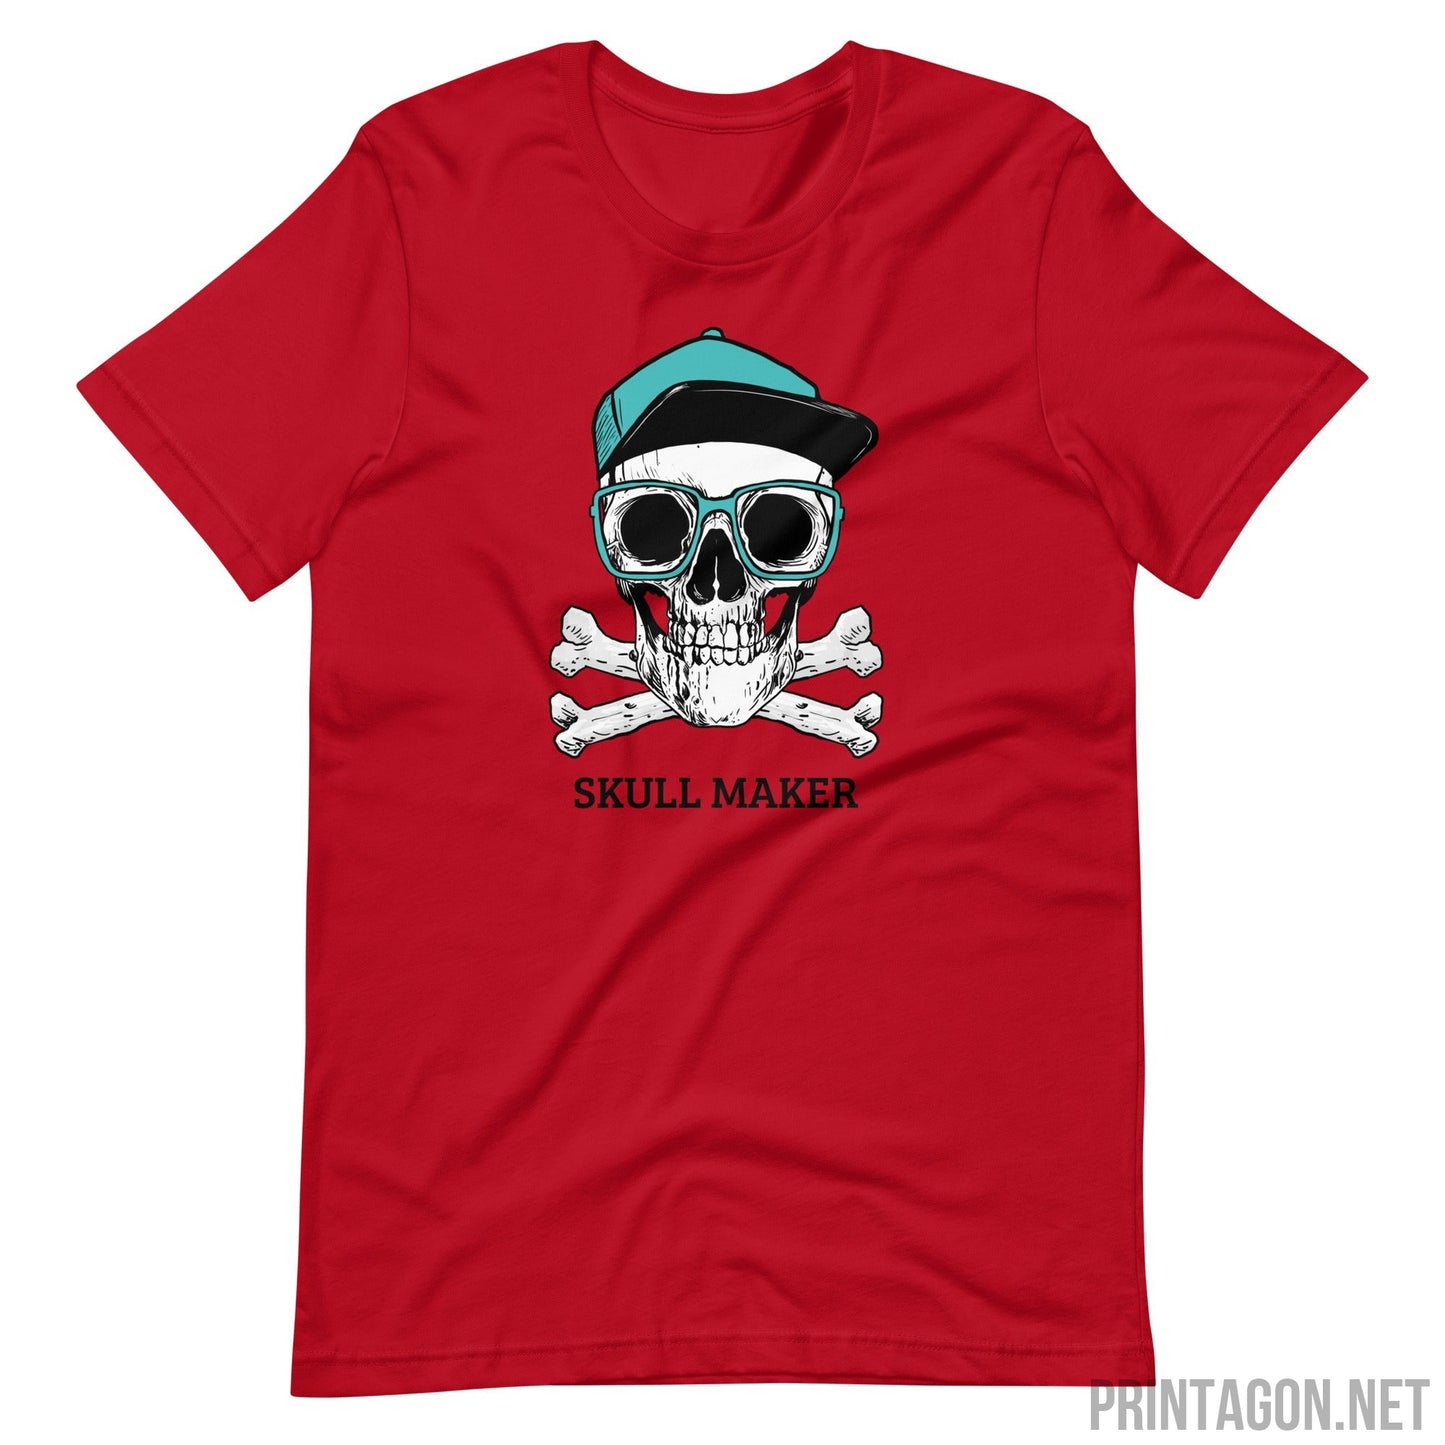 Printagon - Skull Maker with Glasses - Red / XS